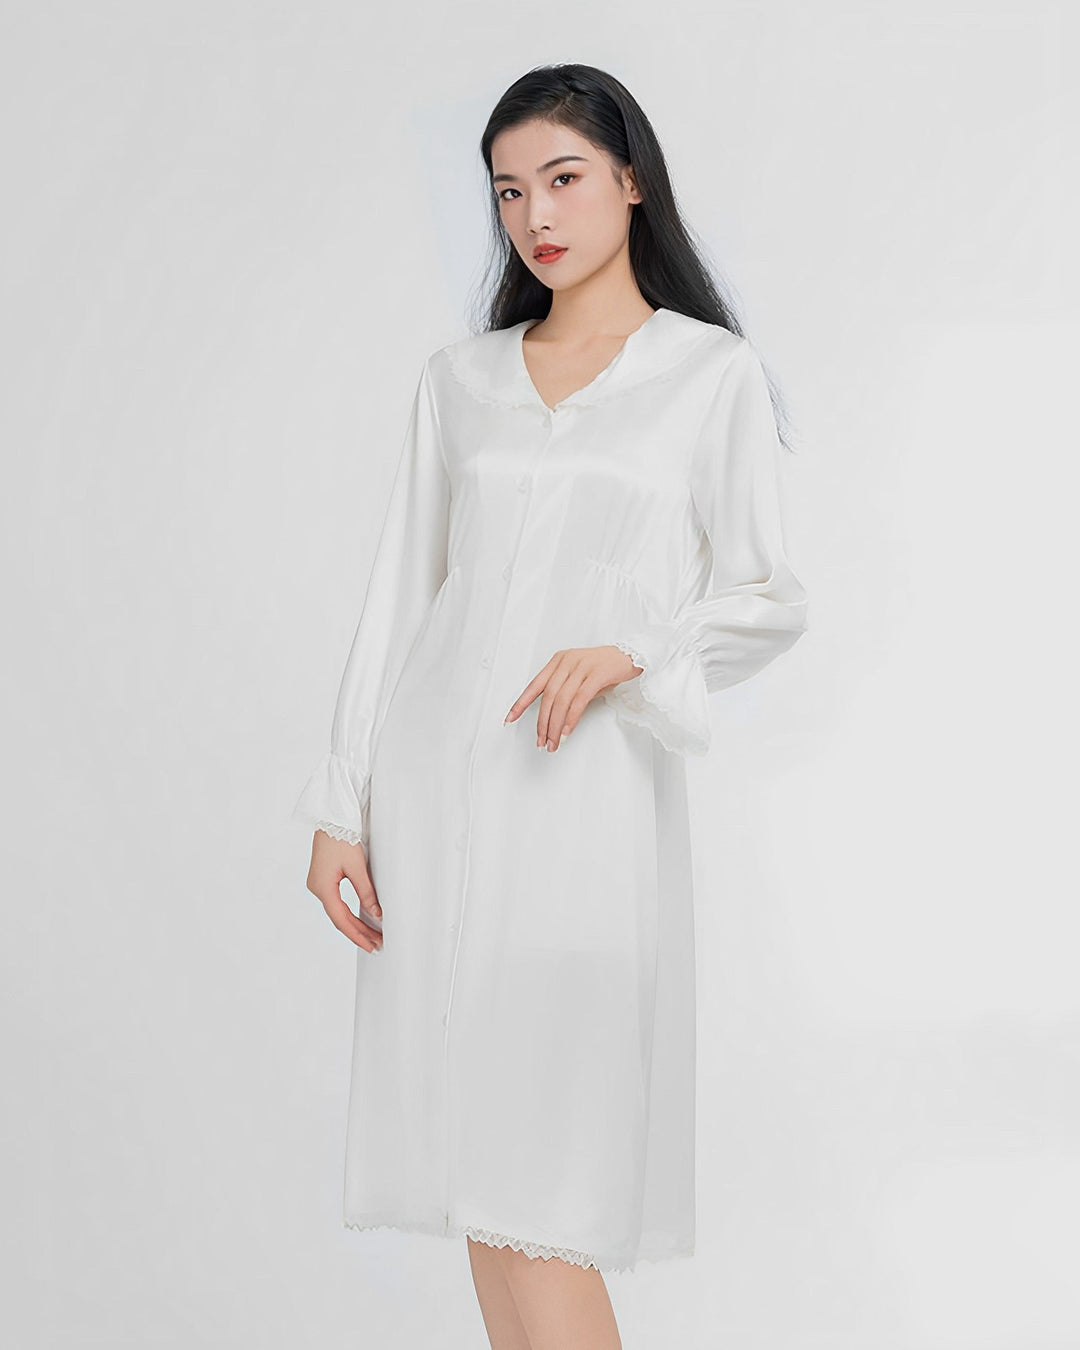 Lace nightgown - SusanSilk